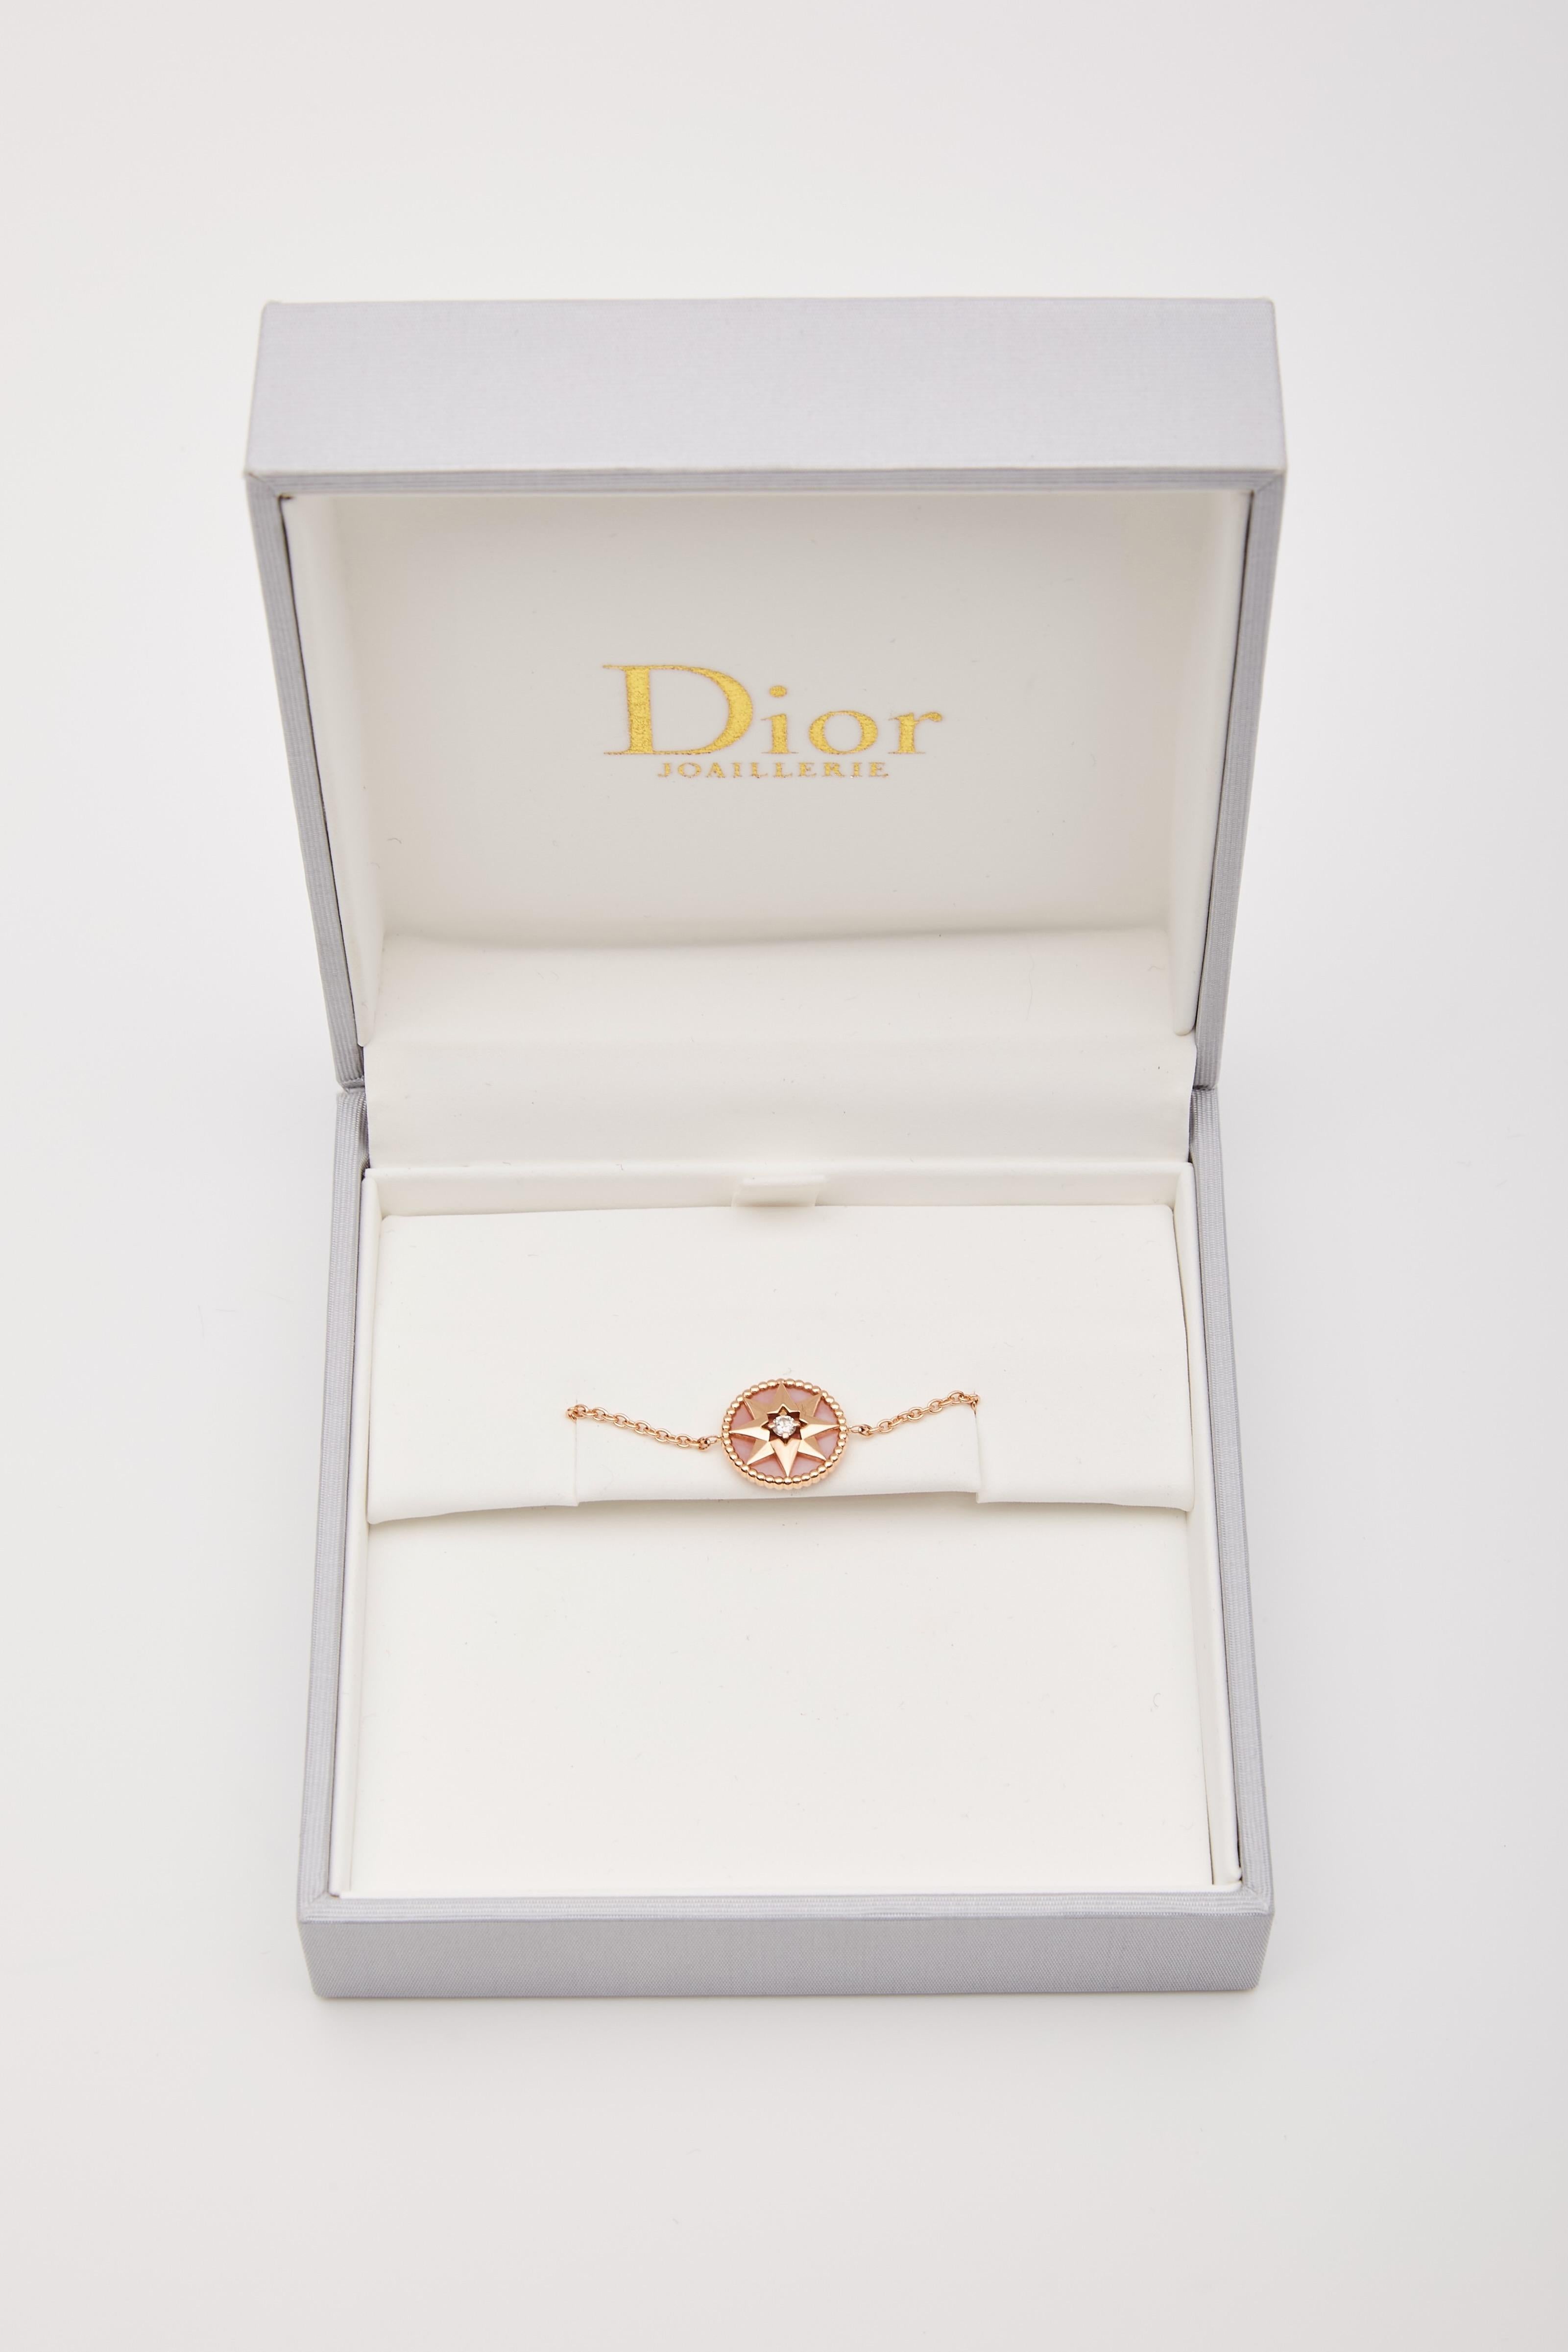 DIOR 18K DIAMOND  ROSE DE VENTS CHARM BRACELET

Introducing the Dior star motif charm rose gold pearl bracelet. The bracelet features an 18 karat rose gold chain with a star pendant adorned with a beautiful central diamond. The bracelet is finished